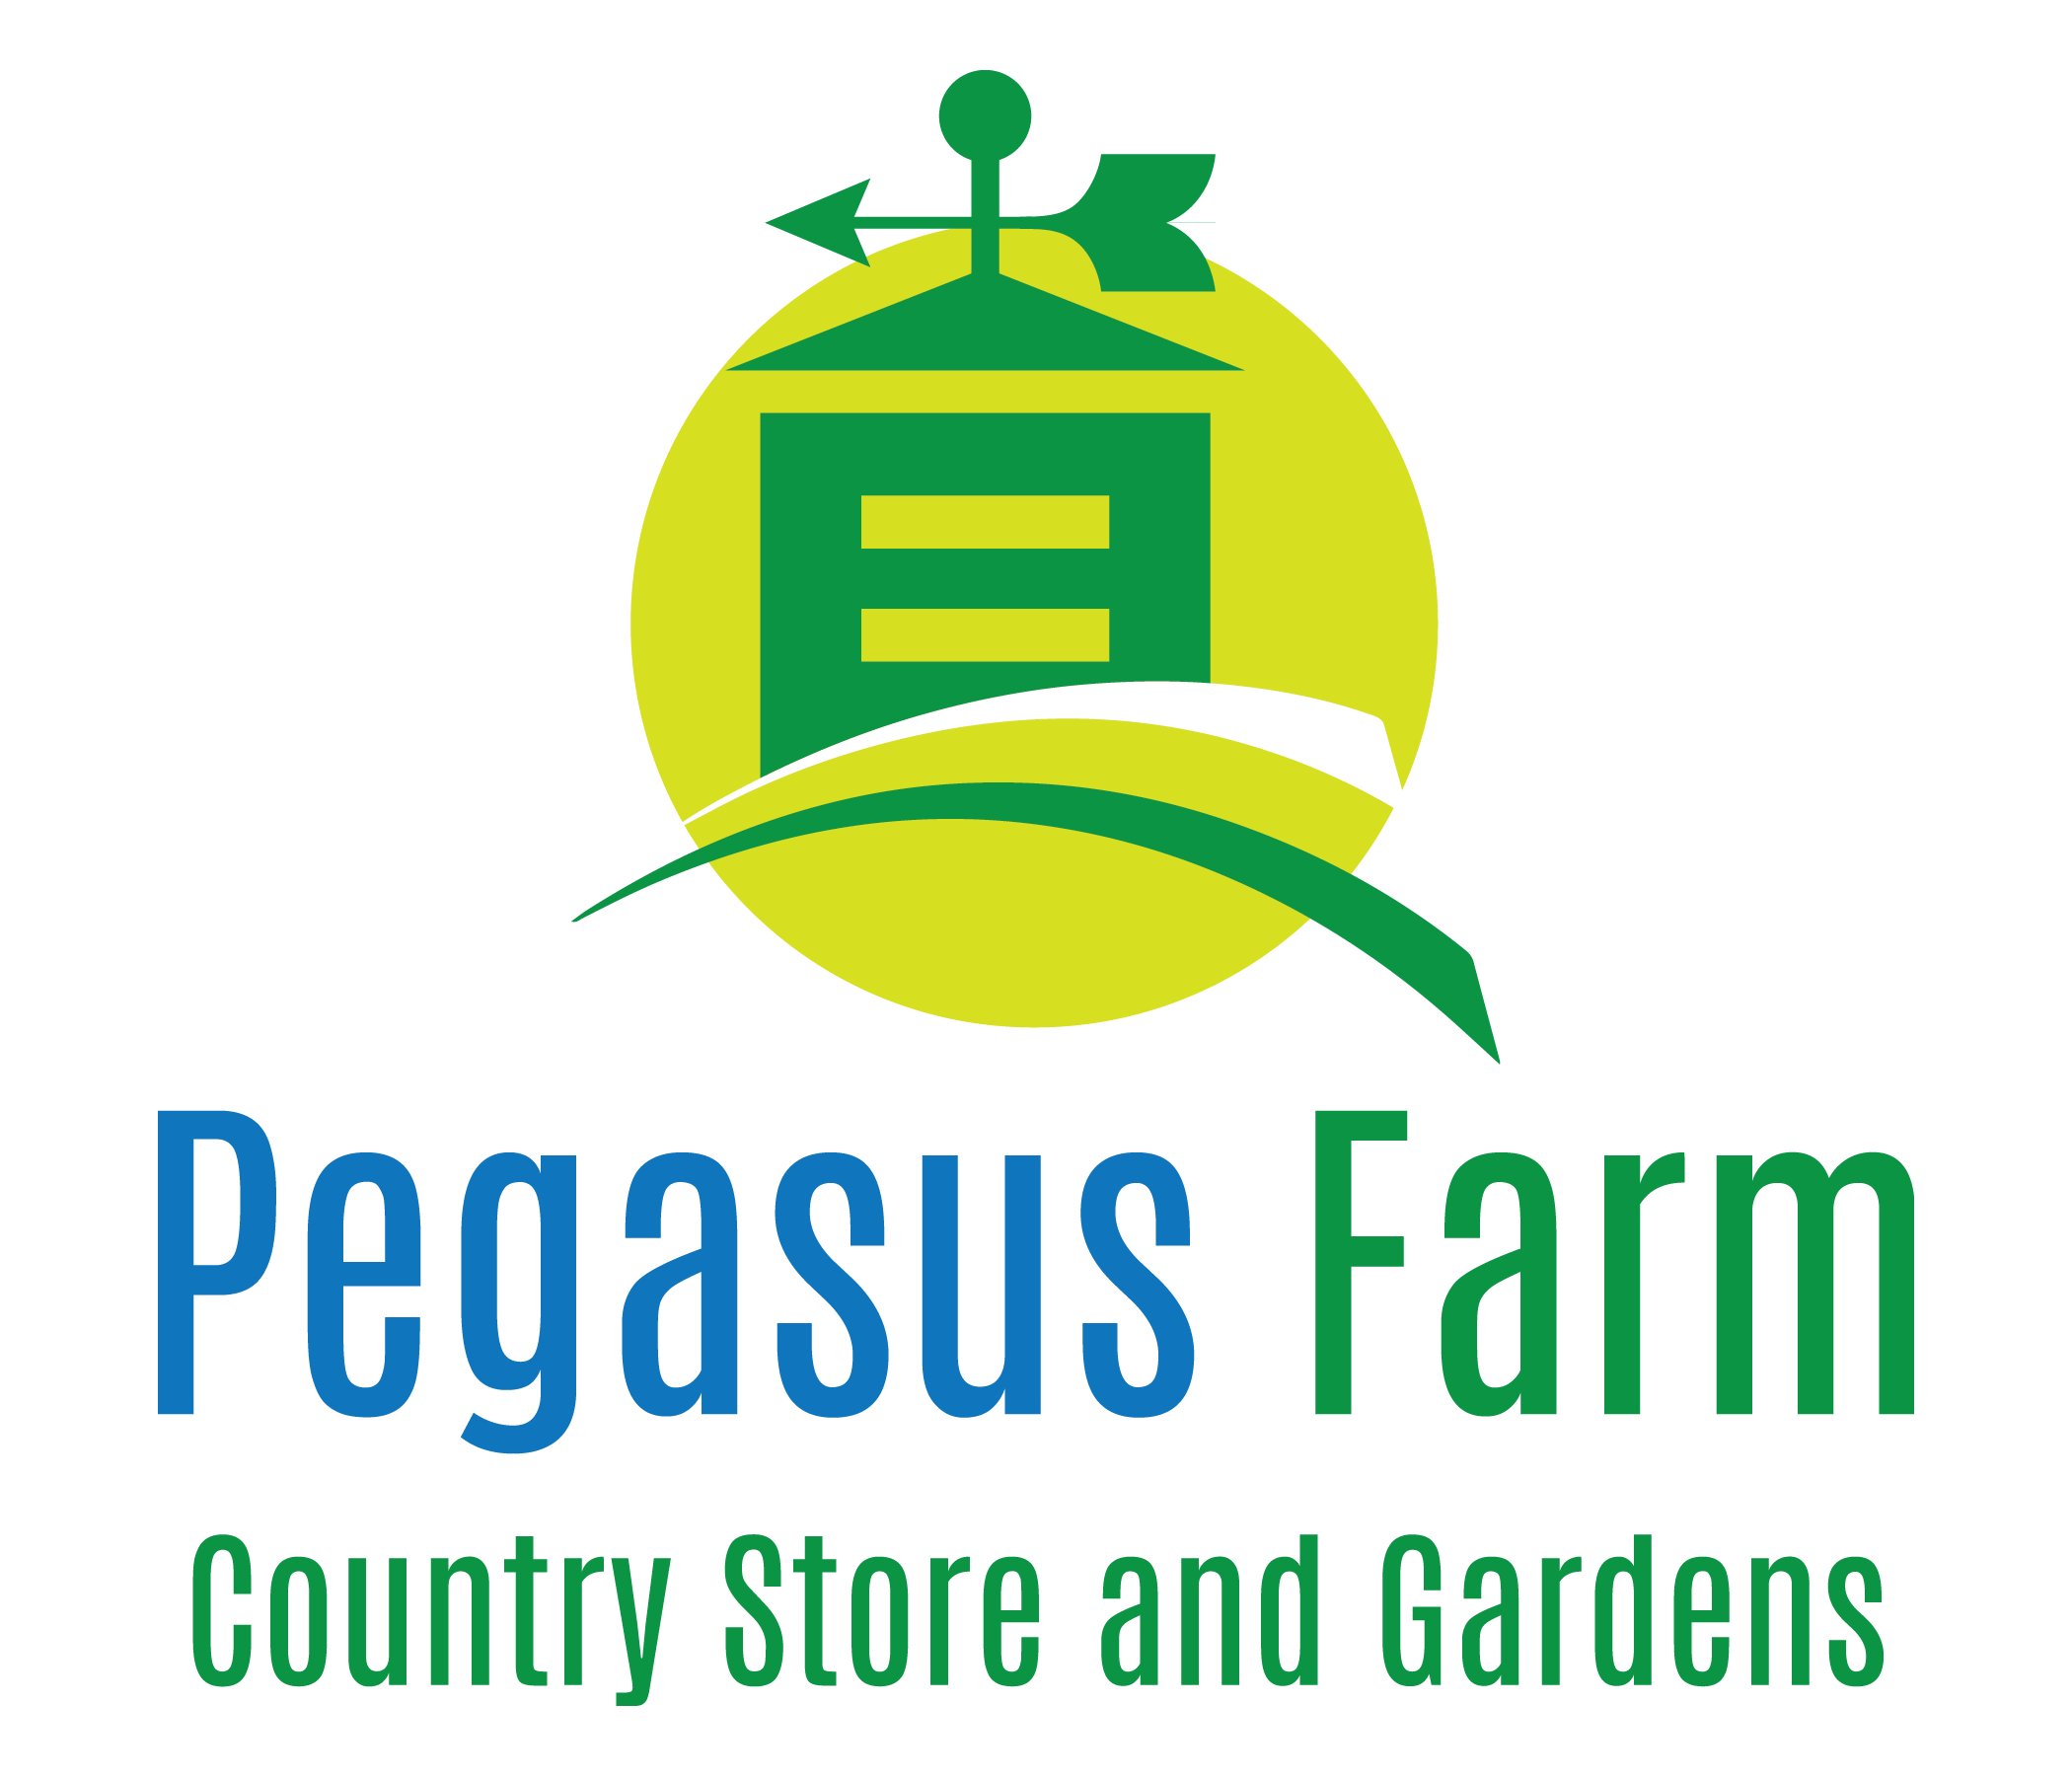 Pegasus Foods Logo - Pegasus Farm: About The Country Store and Gardens